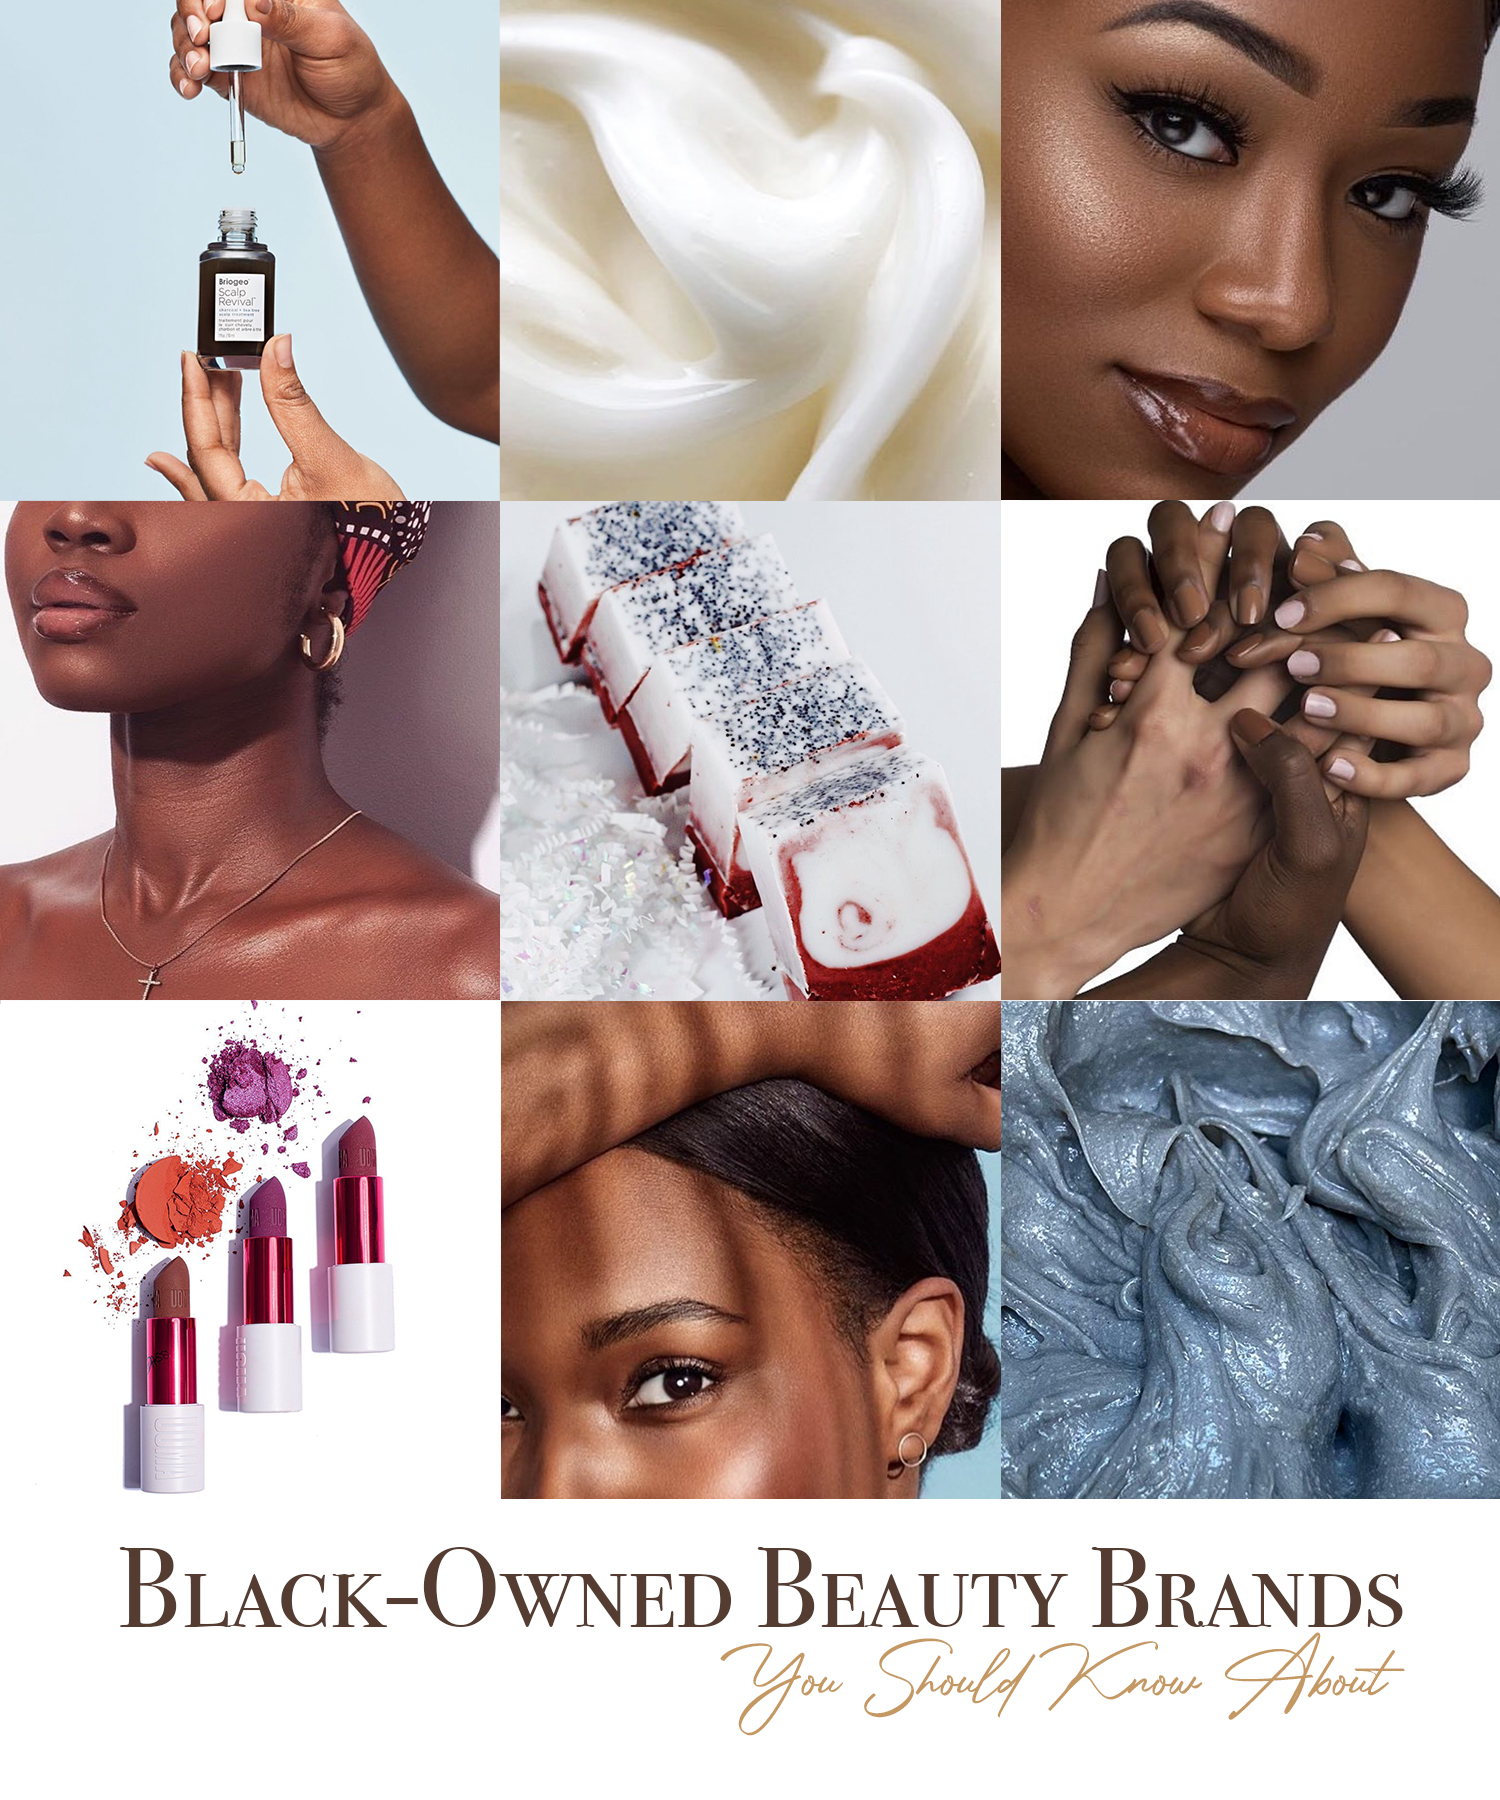 Black Owned Beauty Brands You Should Know About